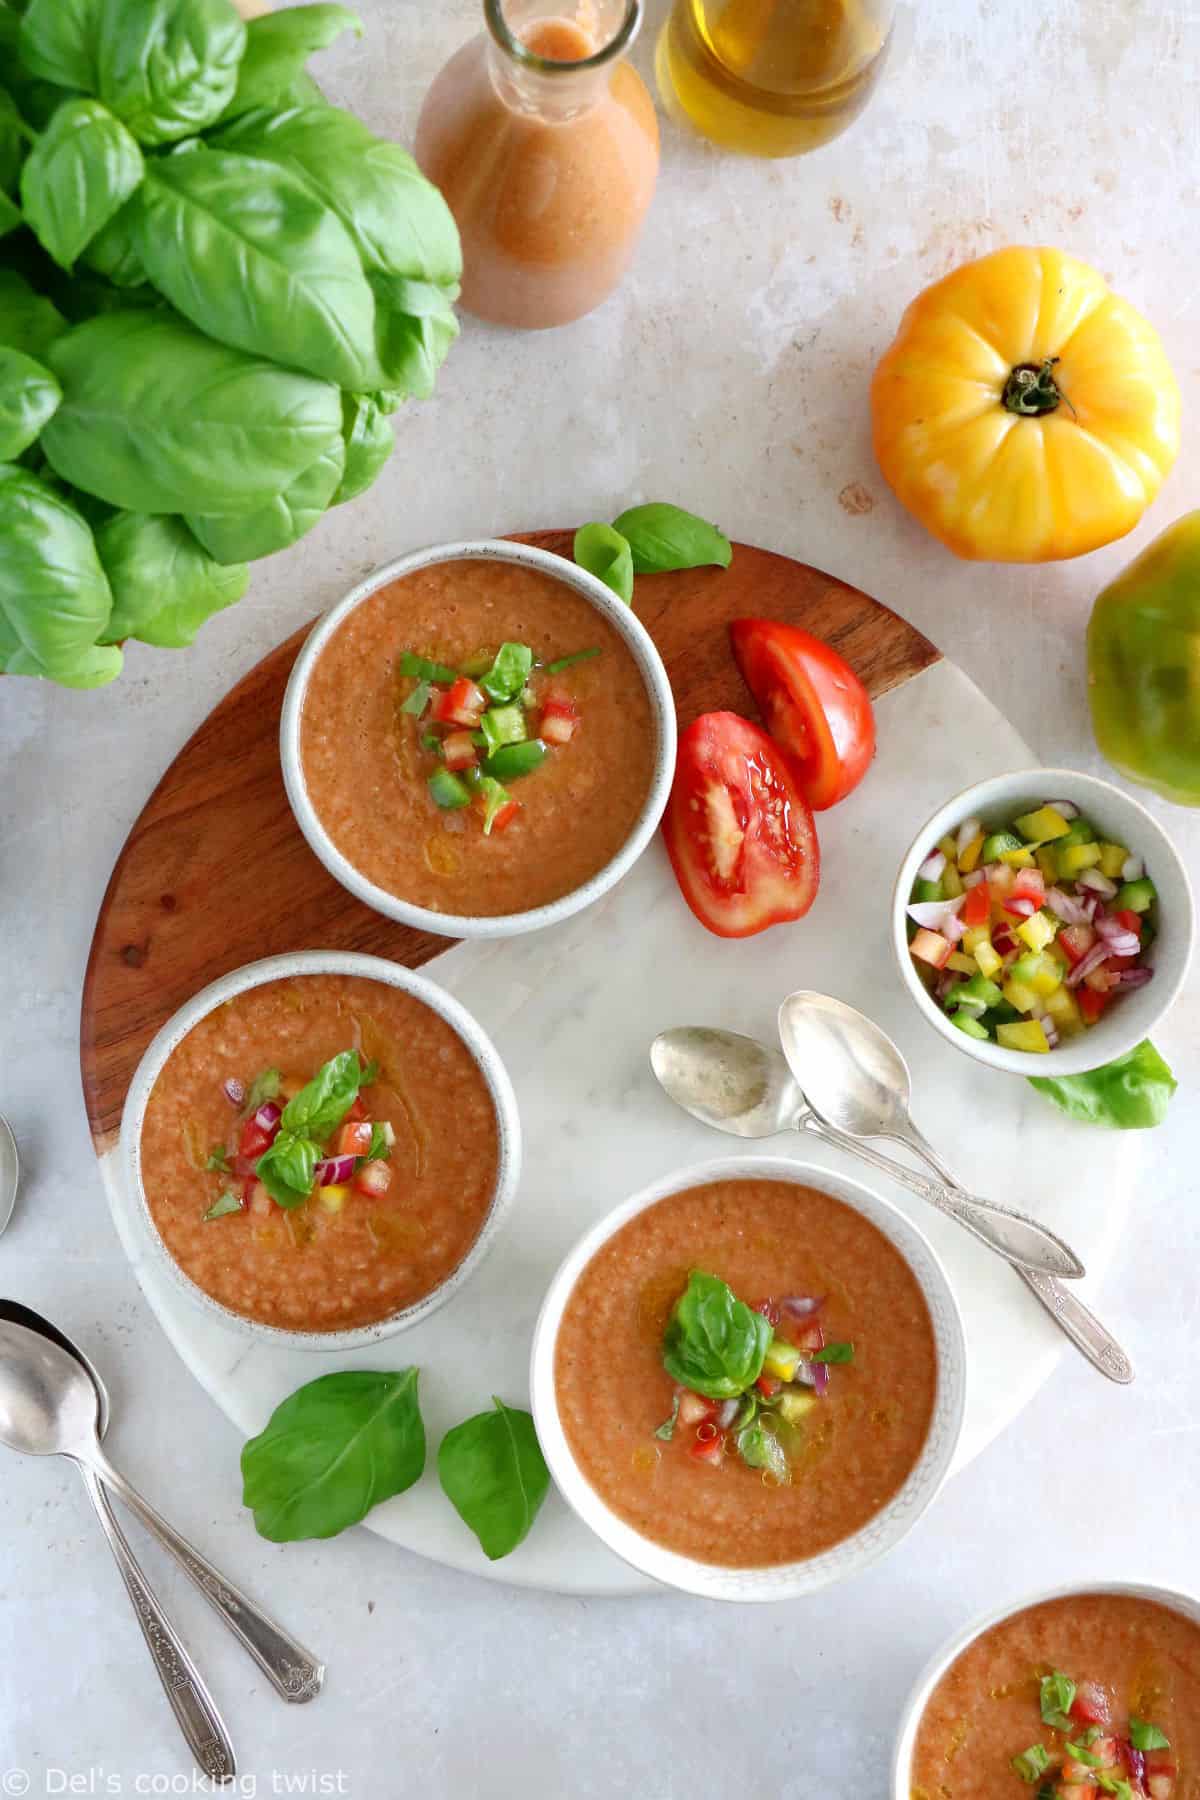 Cool off with this easy 10-minute gazpacho recipe. Prepared with sun-ripe tomatoes and other summer vegetables mixed in a blender with other seasoning, this chilled soup is super refreshing and bursting with fresh-from-the-garden flavors.